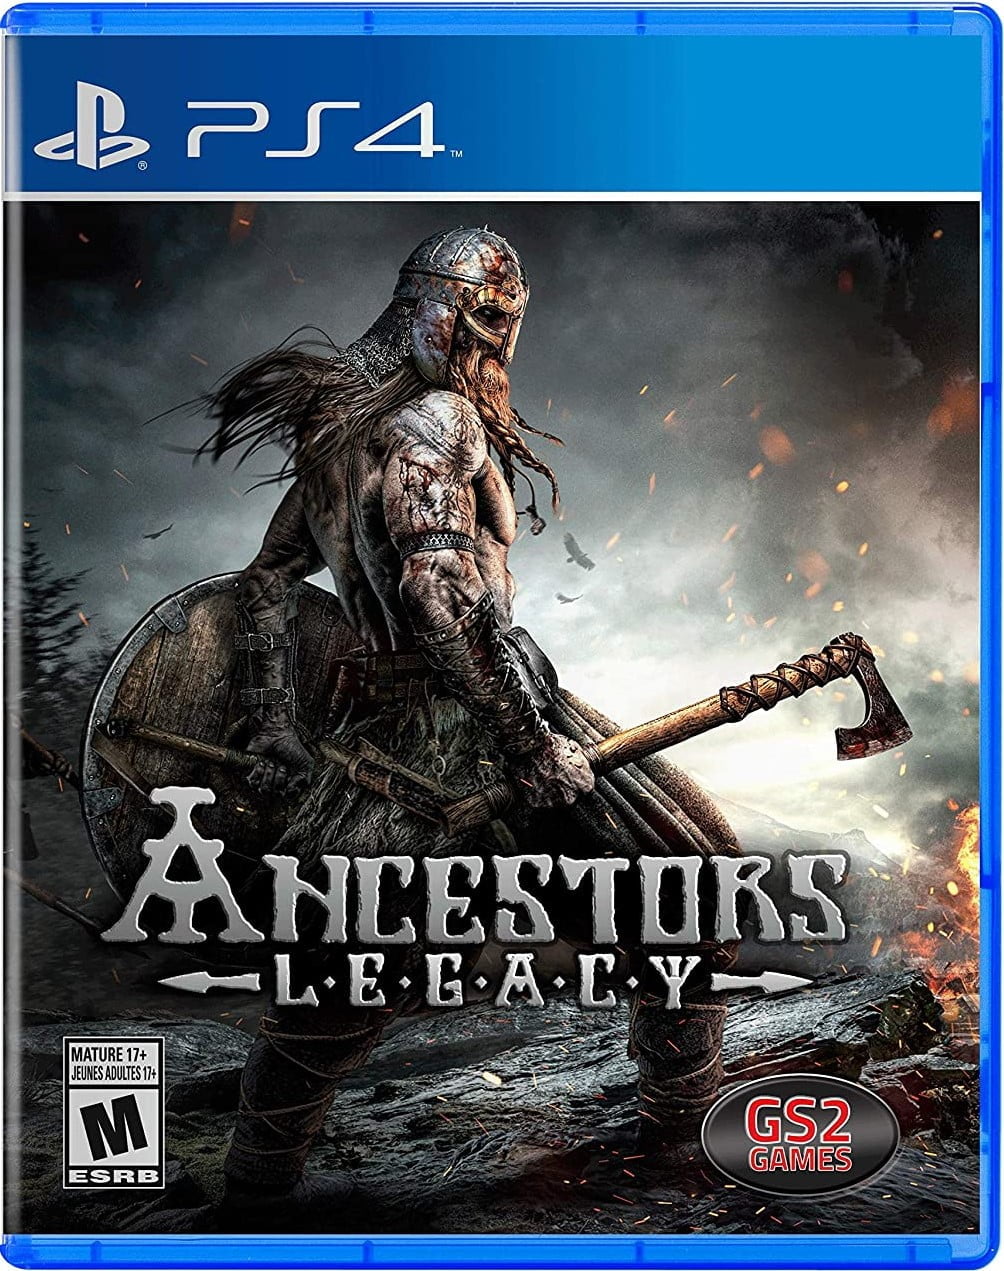 download ancestors ps4 for free